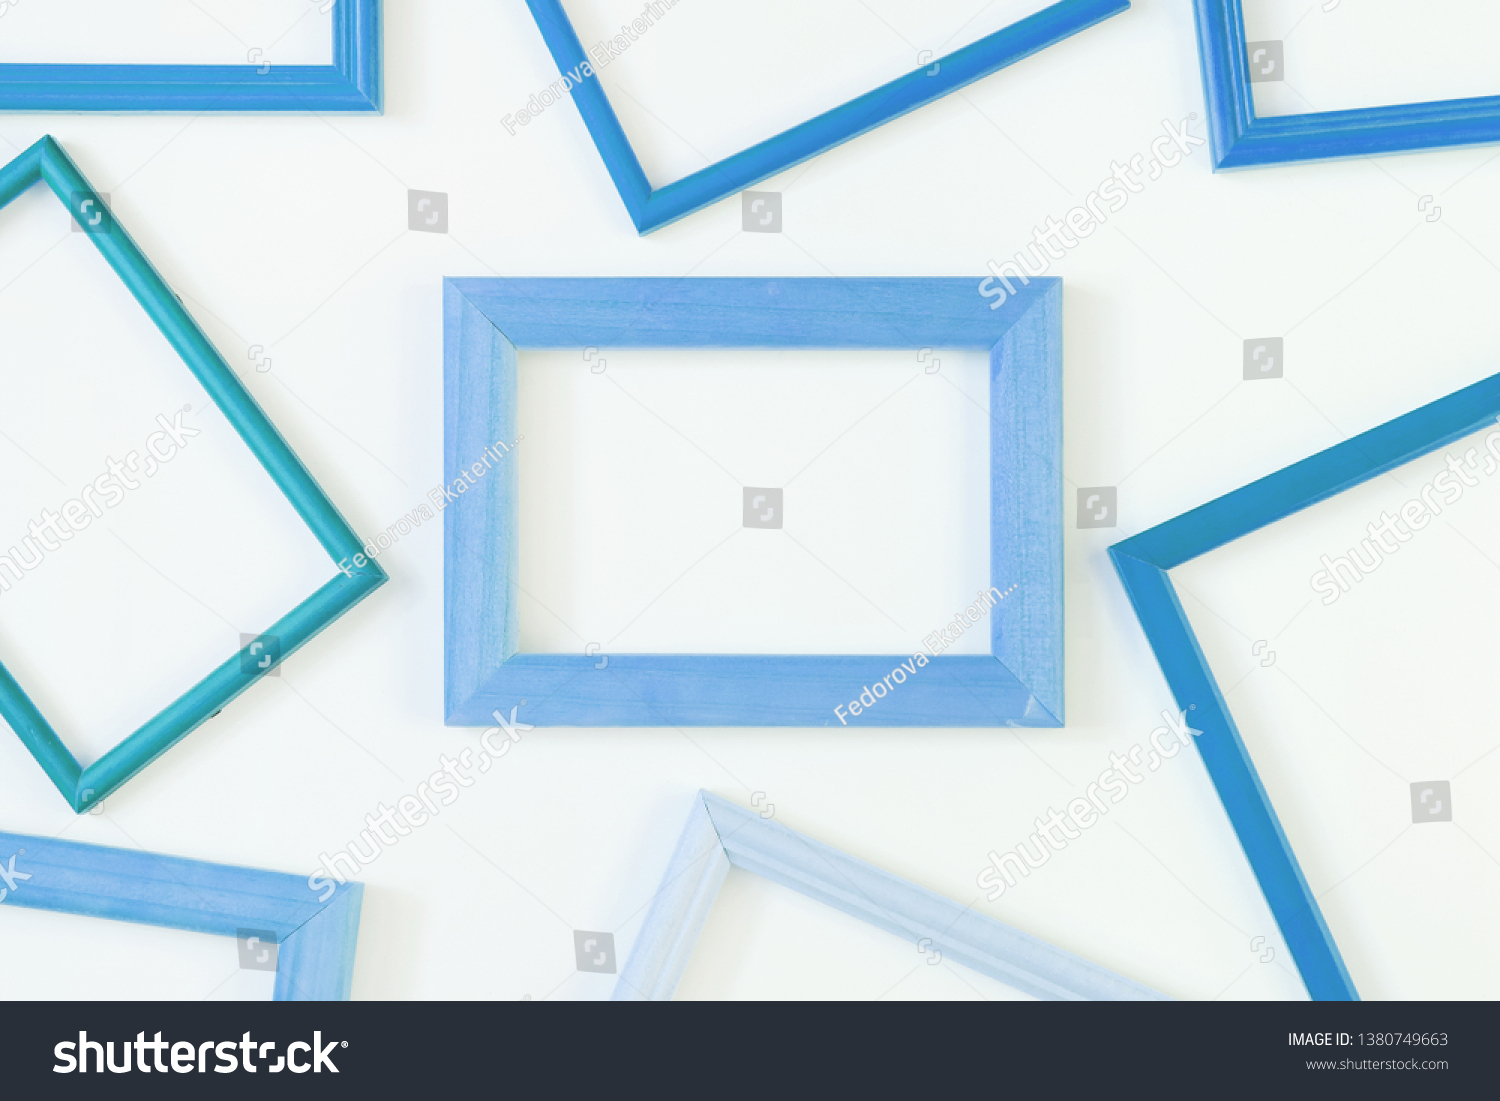 Blue empty frames laid out on a white background. Layout for the layout. Photo with space for text and images. #1380749663